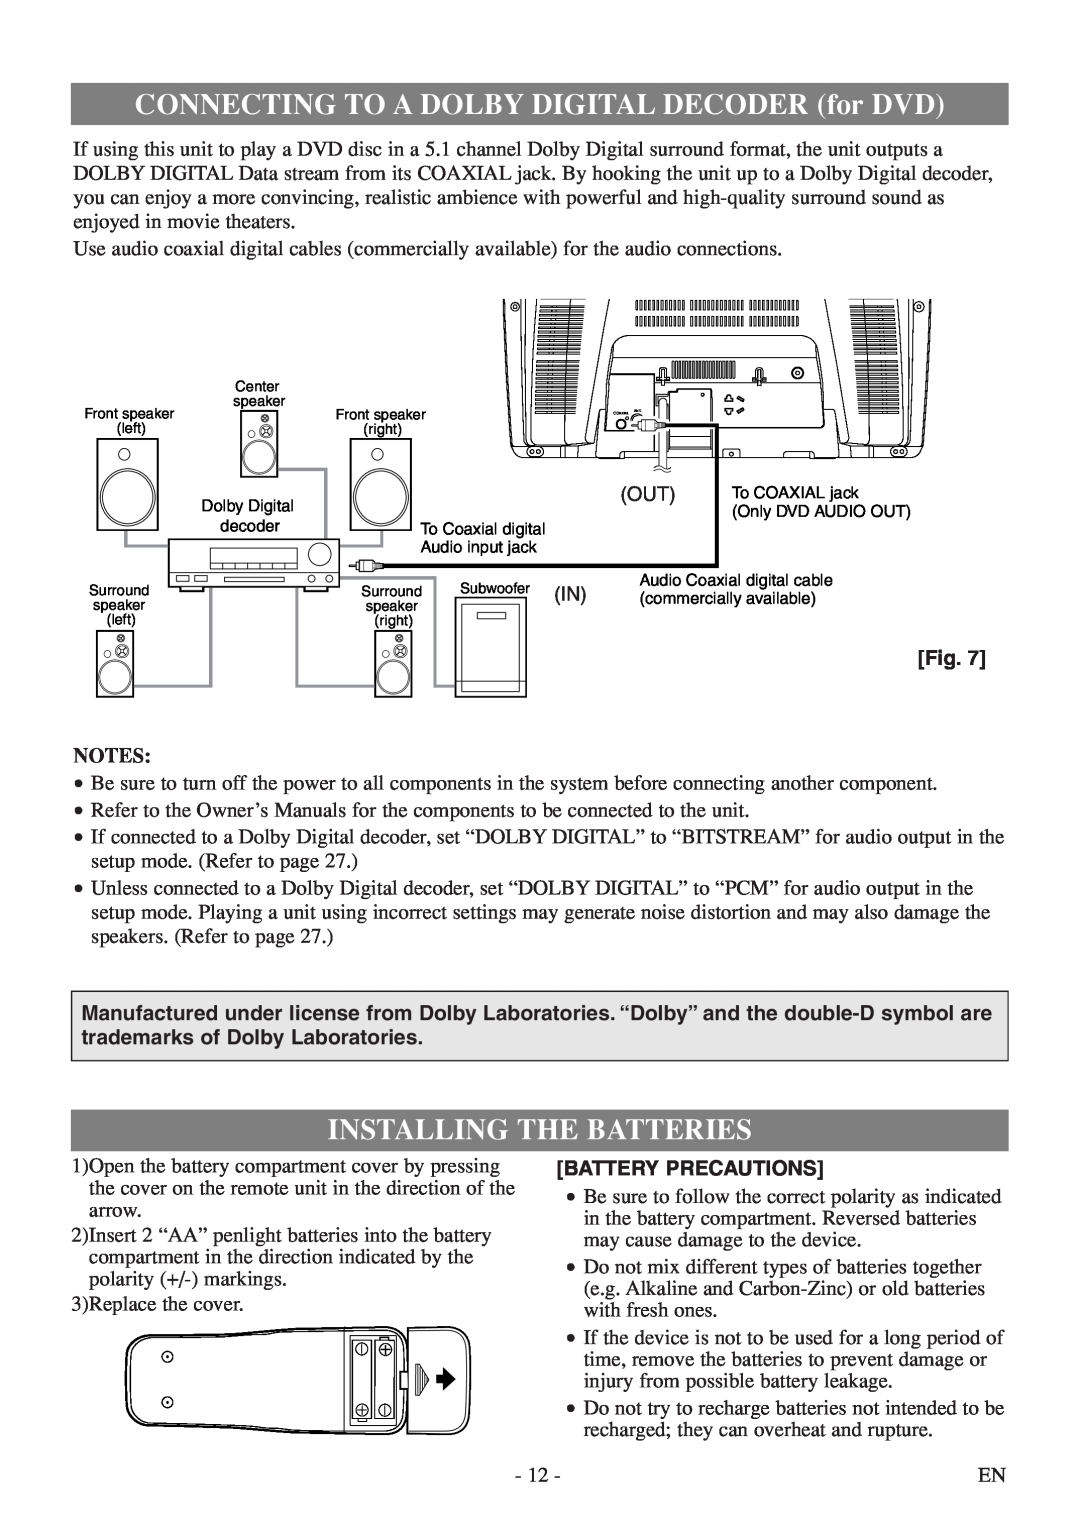 Sylvania 6520FDF owner manual CONNECTING TO A DOLBY DIGITAL DECODER for DVD, Installing The Batteries, Battery Precautions 